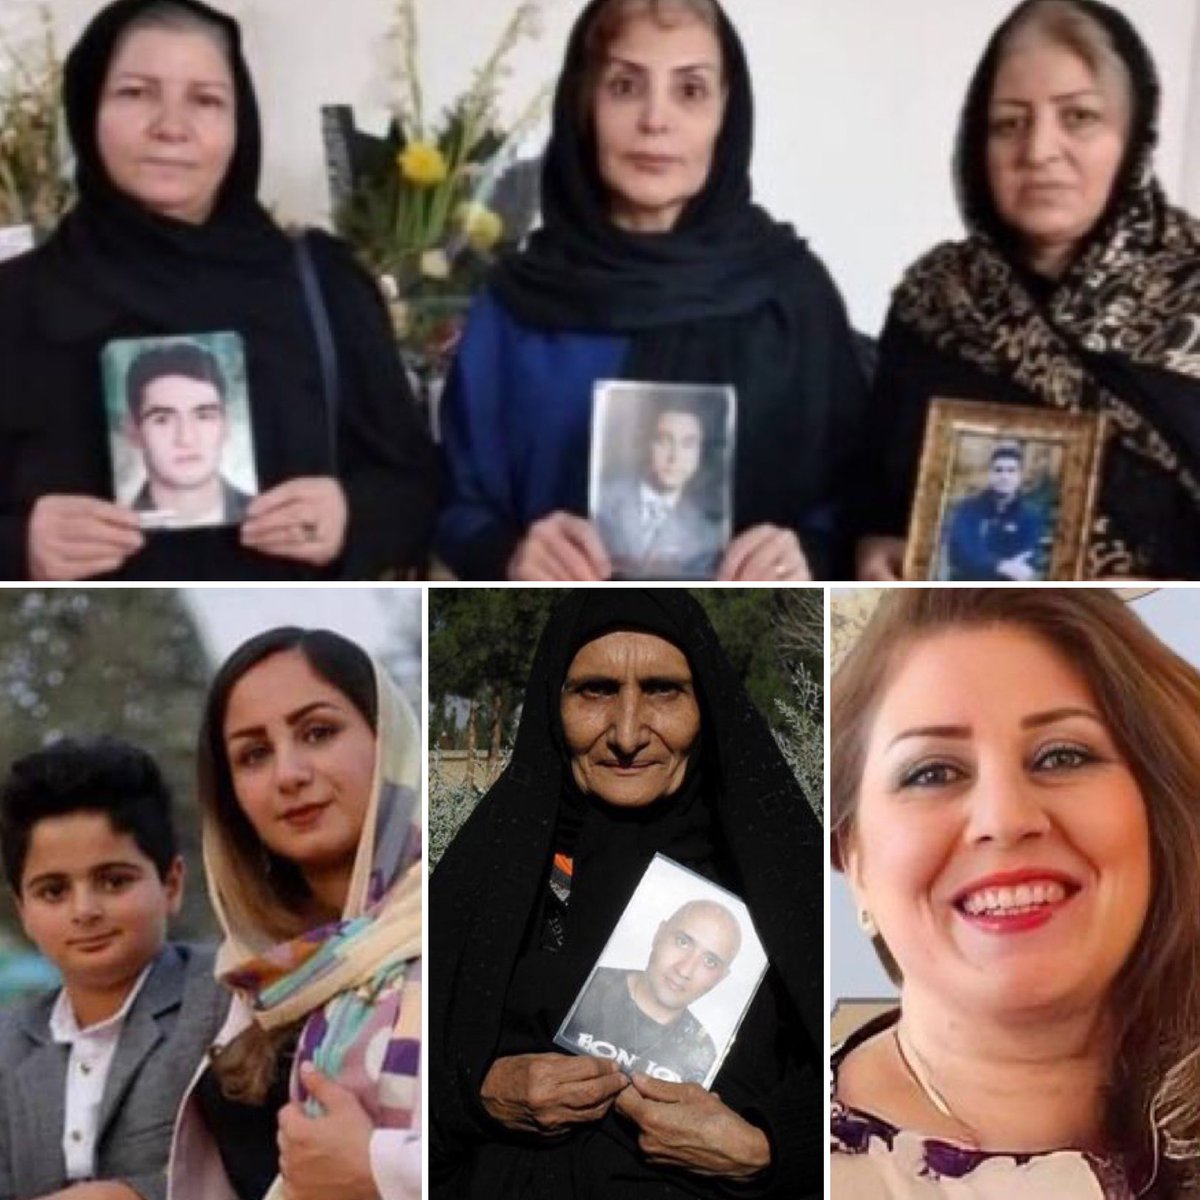 This #MothersDay I’m thinking of all the mothers in the world who have lost their children, or have been separated from their children due to injustice, conflict  and repression. Particlarly the mothers and children who have lost their lives on the path to freedom in Iran.